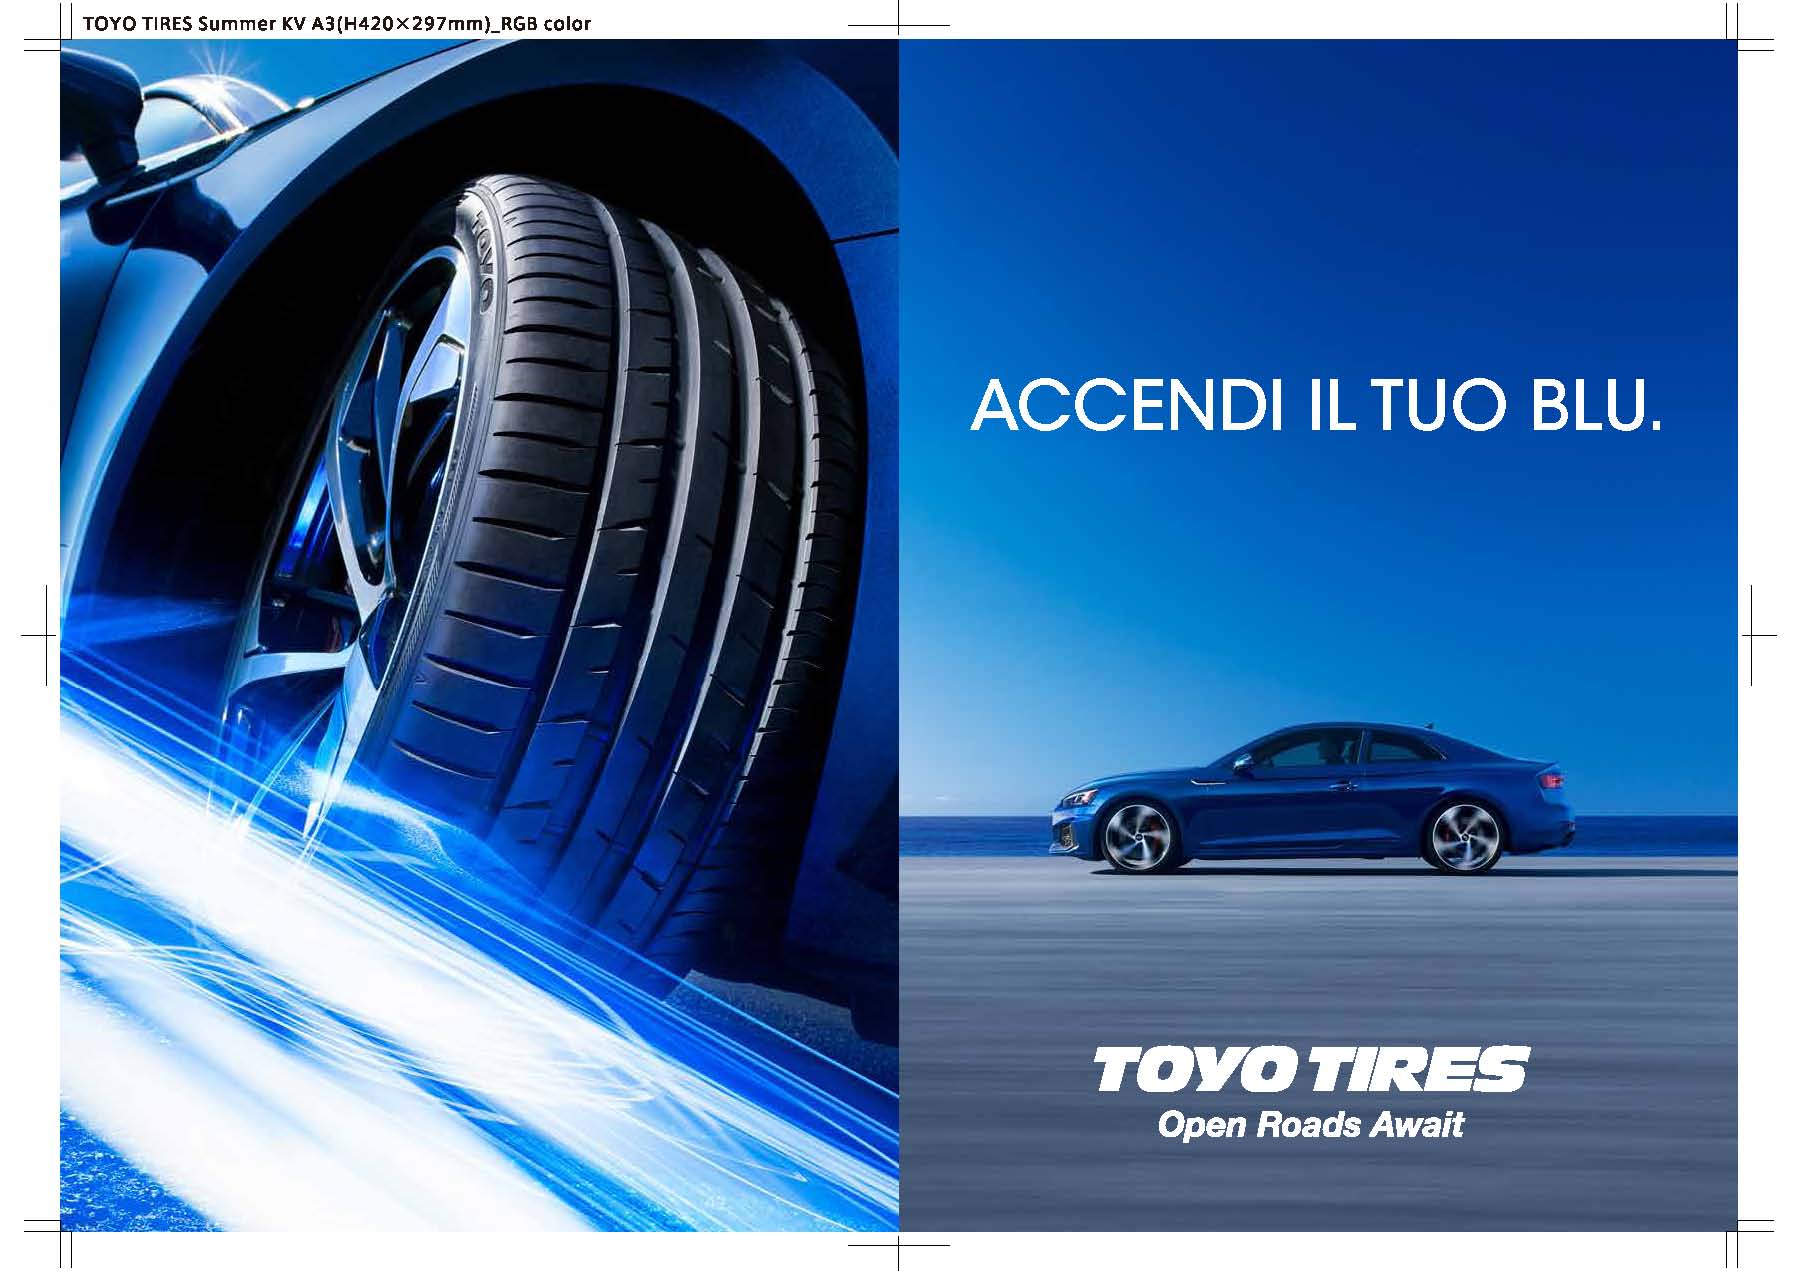 Parisblue e Suitegrey, la nuova stagione delle special edition firmate Smart - image 0324_28_toyotires_summer_KV_side_layout_RGB_ITIT_v05_ToClient_07may2020 on https://motori.net